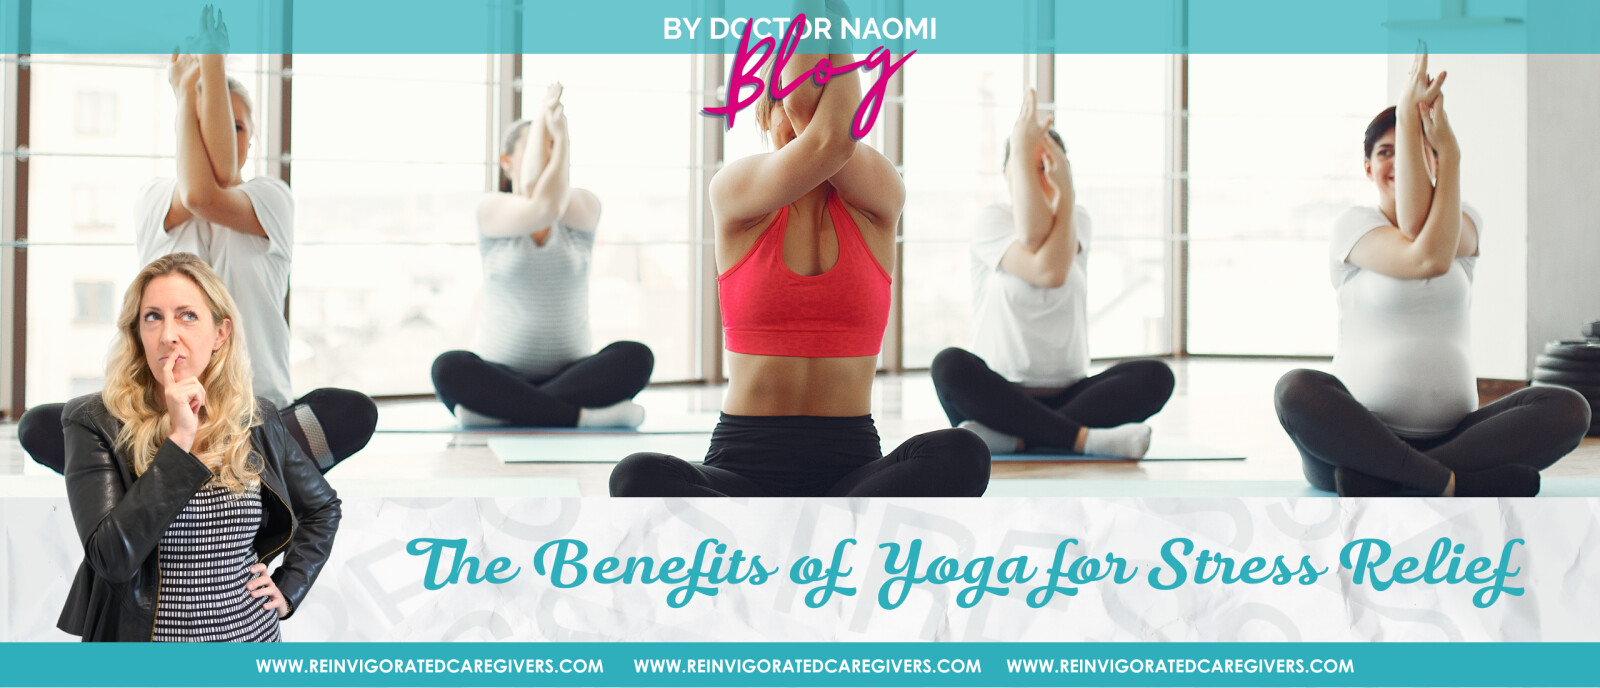 The benefits of yoga for stress relief